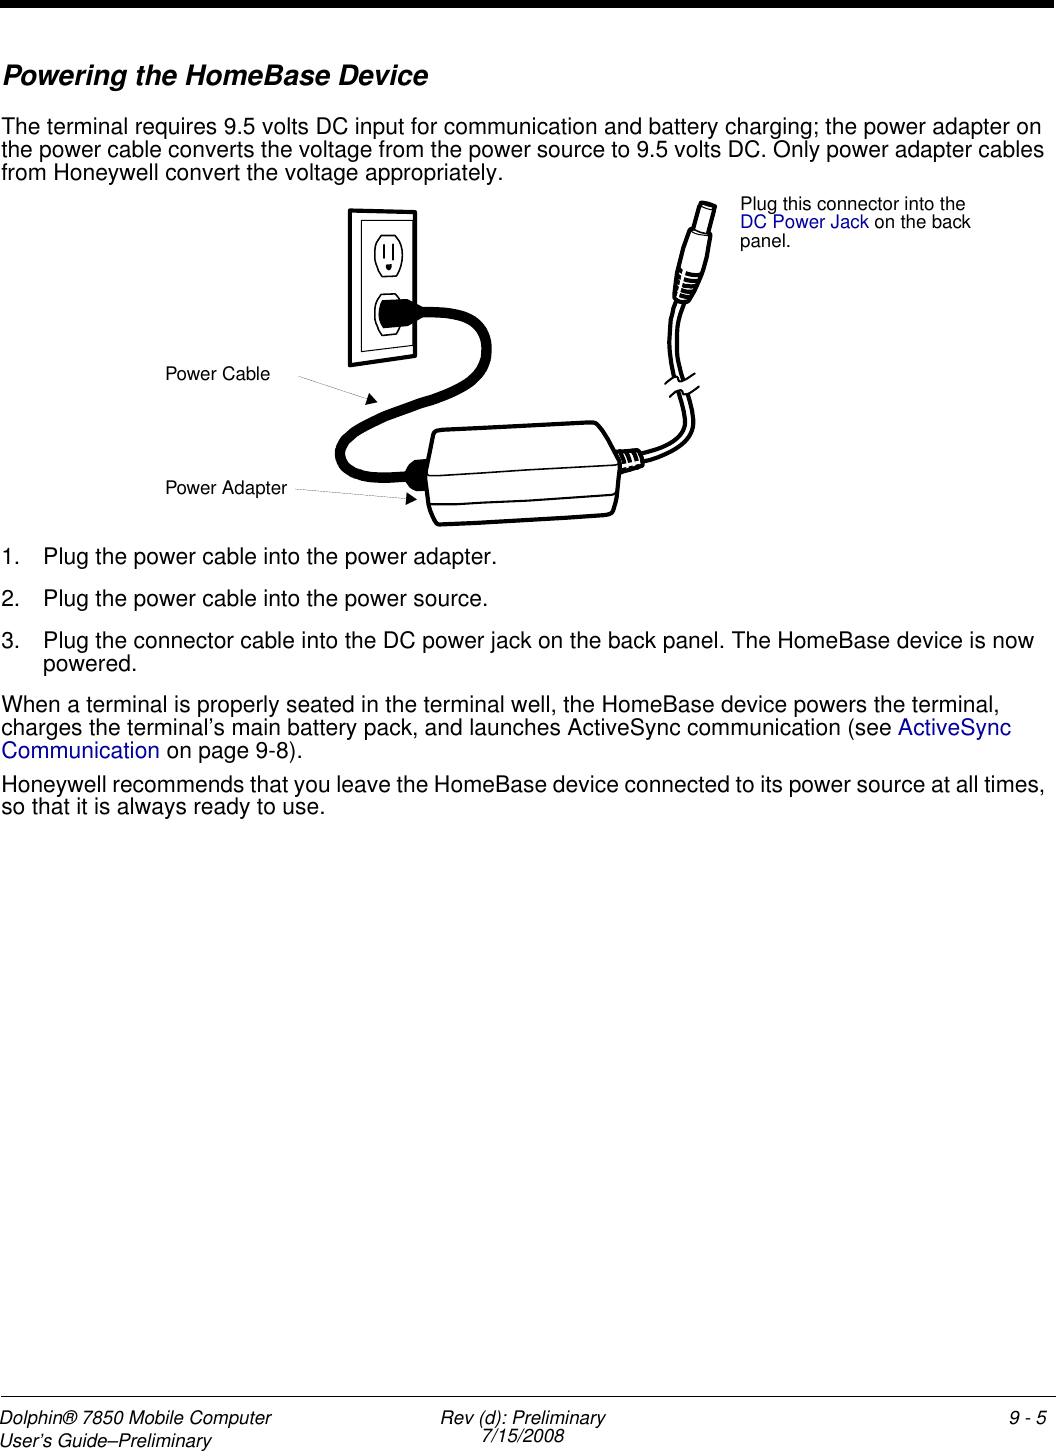 Dolphin® 7850 Mobile Computer  User’s Guide–Preliminary  Rev (d): Preliminary7/15/2008 9 - 5Powering the HomeBase DeviceThe terminal requires 9.5 volts DC input for communication and battery charging; the power adapter on the power cable converts the voltage from the power source to 9.5 volts DC. Only power adapter cables from Honeywell convert the voltage appropriately.1. Plug the power cable into the power adapter.2. Plug the power cable into the power source.3. Plug the connector cable into the DC power jack on the back panel. The HomeBase device is now powered. When a terminal is properly seated in the terminal well, the HomeBase device powers the terminal, charges the terminal’s main battery pack, and launches ActiveSync communication (see ActiveSync Communication on page 9-8).Honeywell recommends that you leave the HomeBase device connected to its power source at all times, so that it is always ready to use.Plug this connector into the DC Power Jack on the back panel.Power AdapterPower Cable